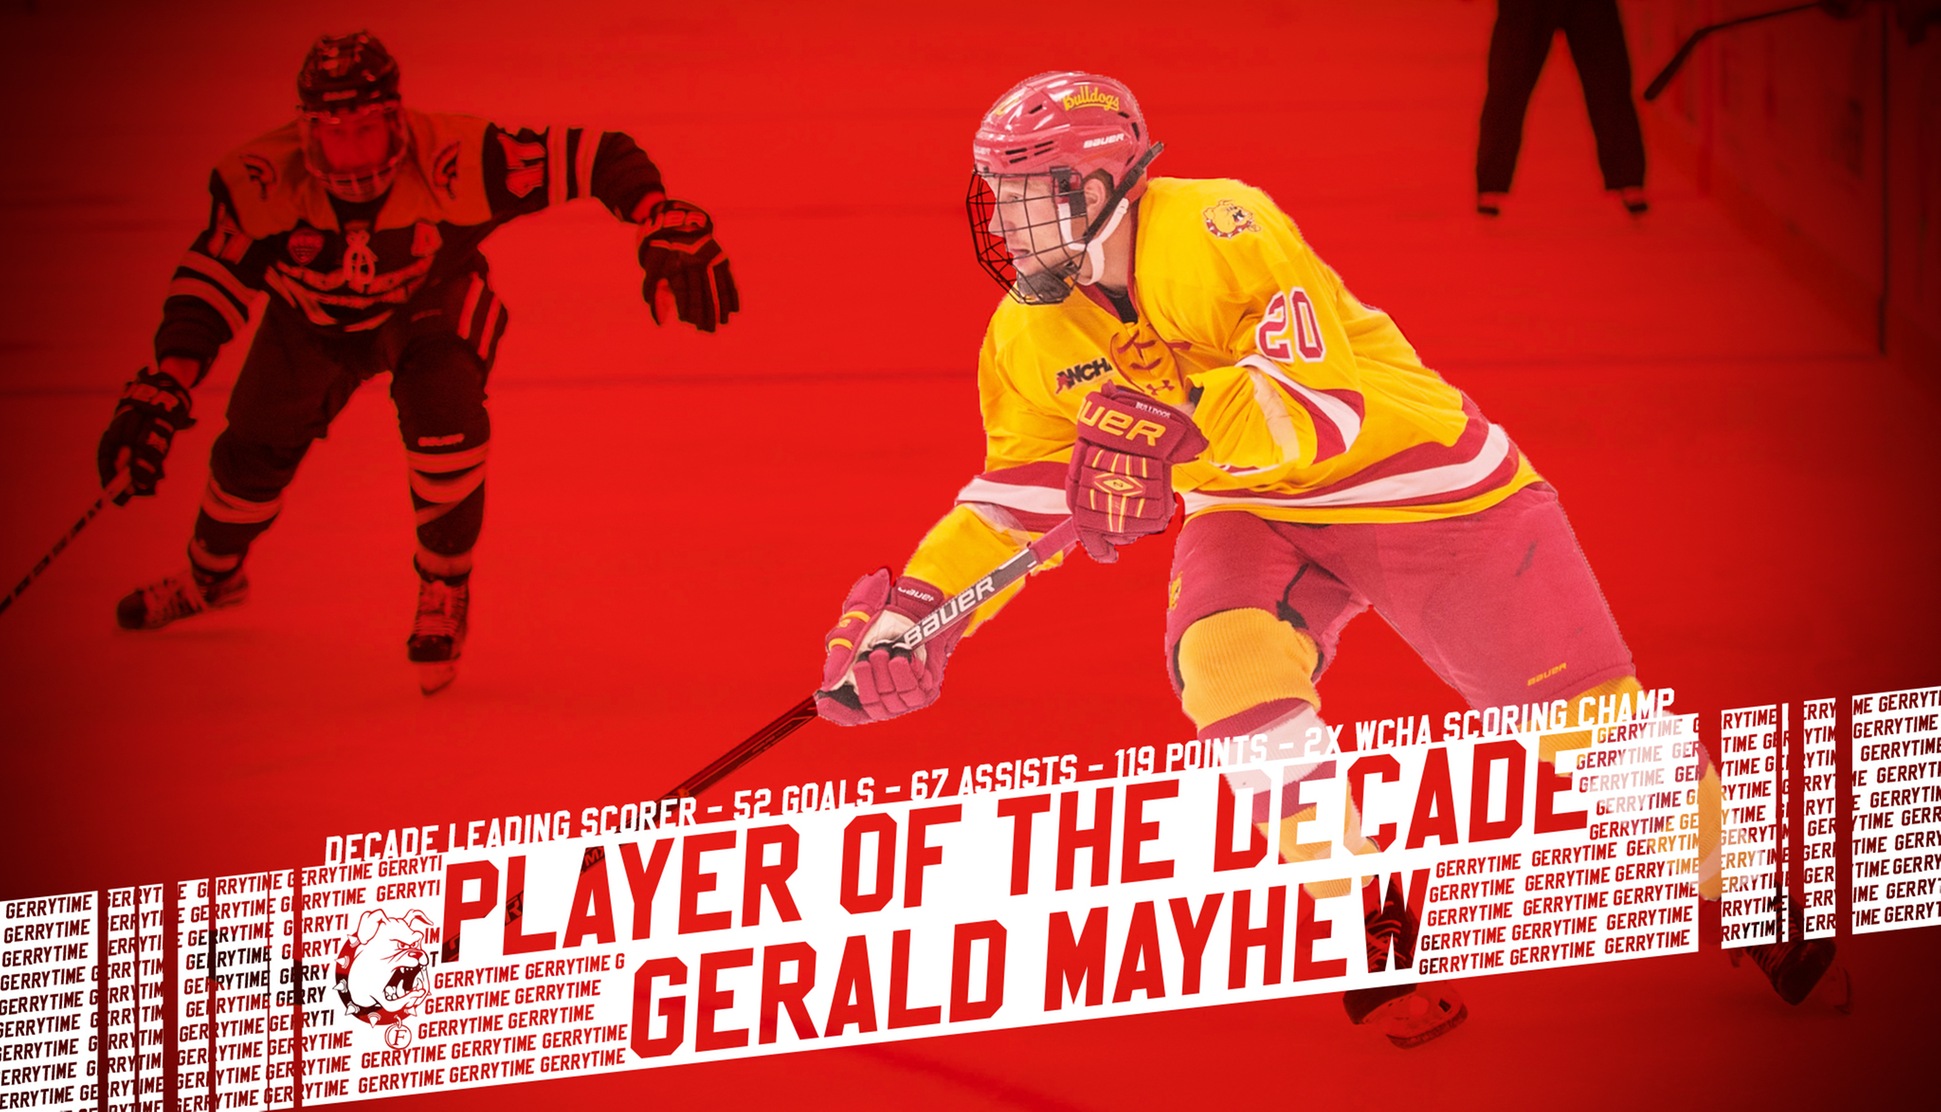 Ferris State Alum Gerald Mayhew Named Player of the Decade